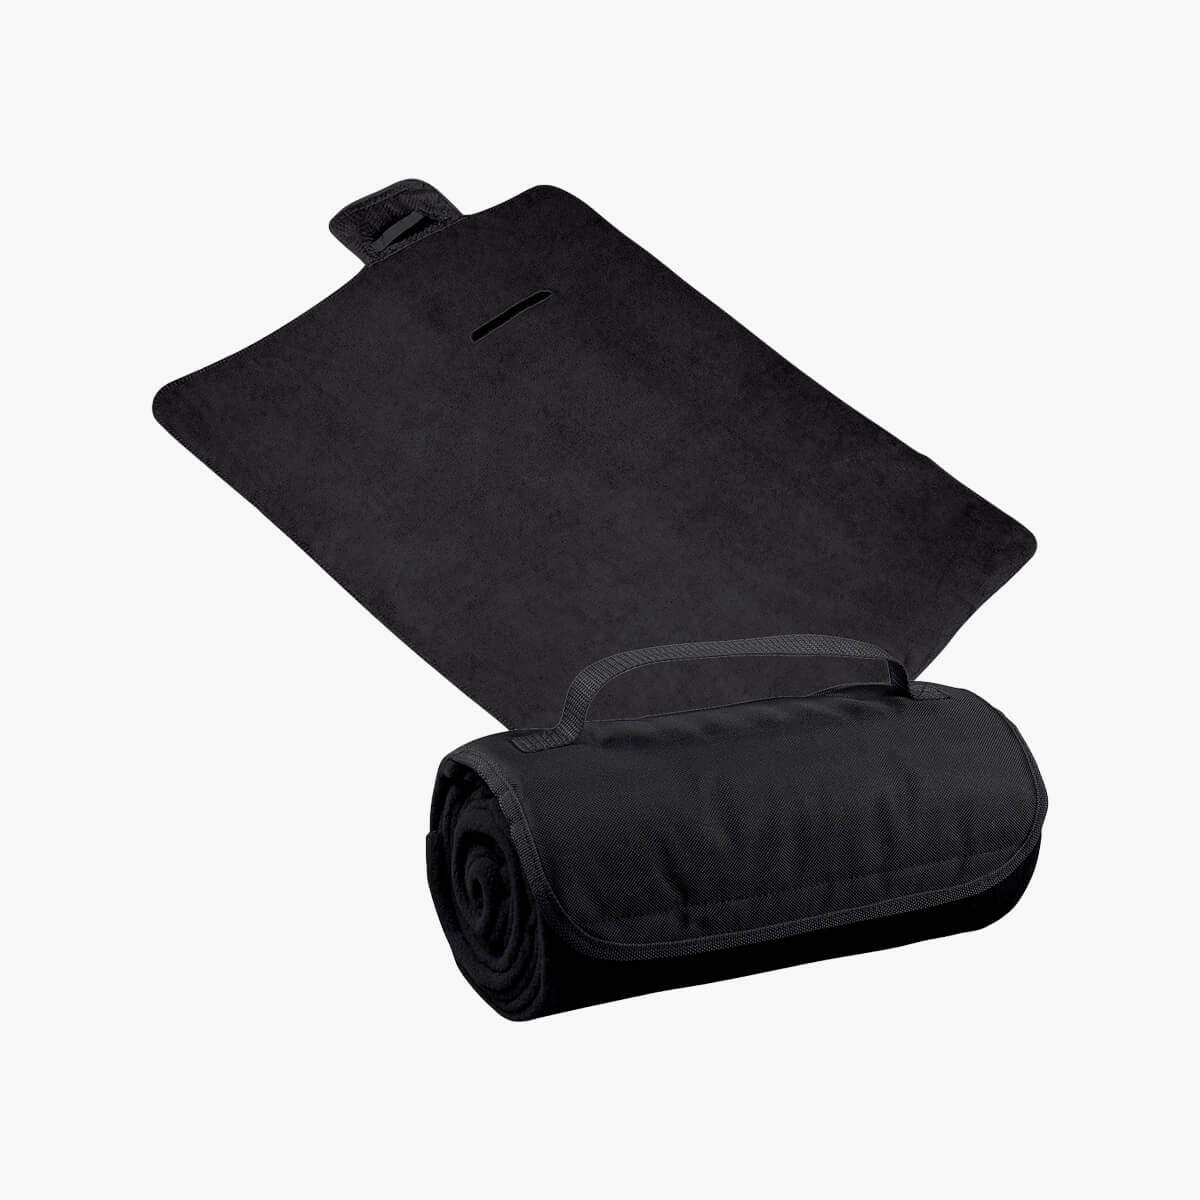 The Essentials Roll-N-Go Sport Blanket